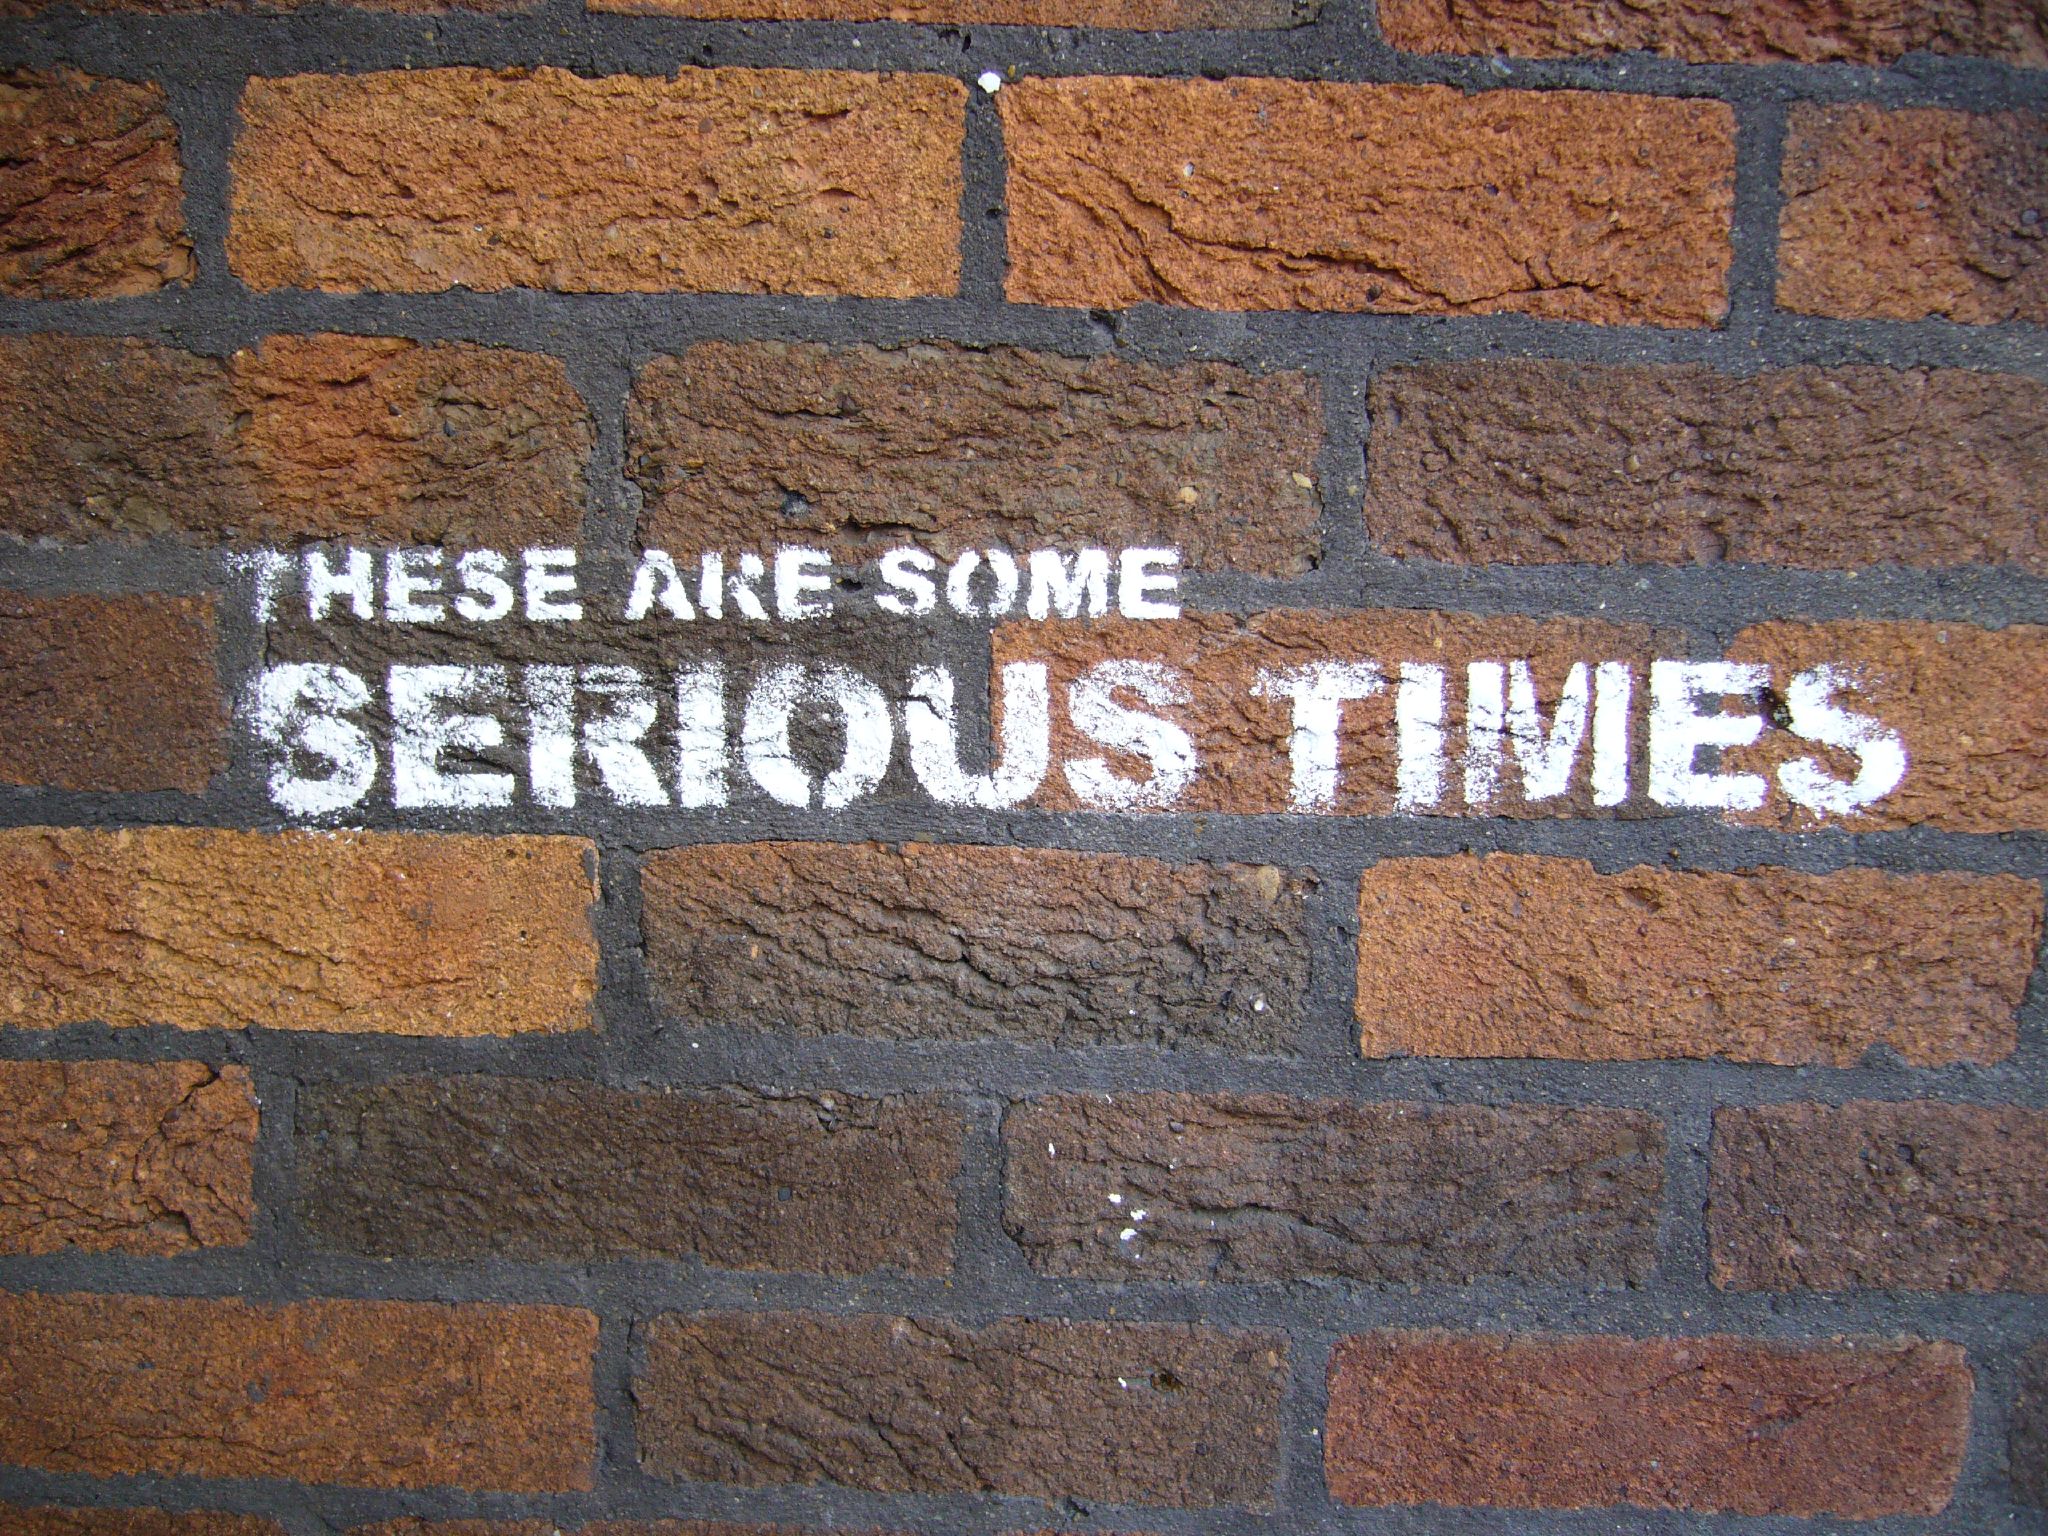 Graffiti on wall: These are some serious times